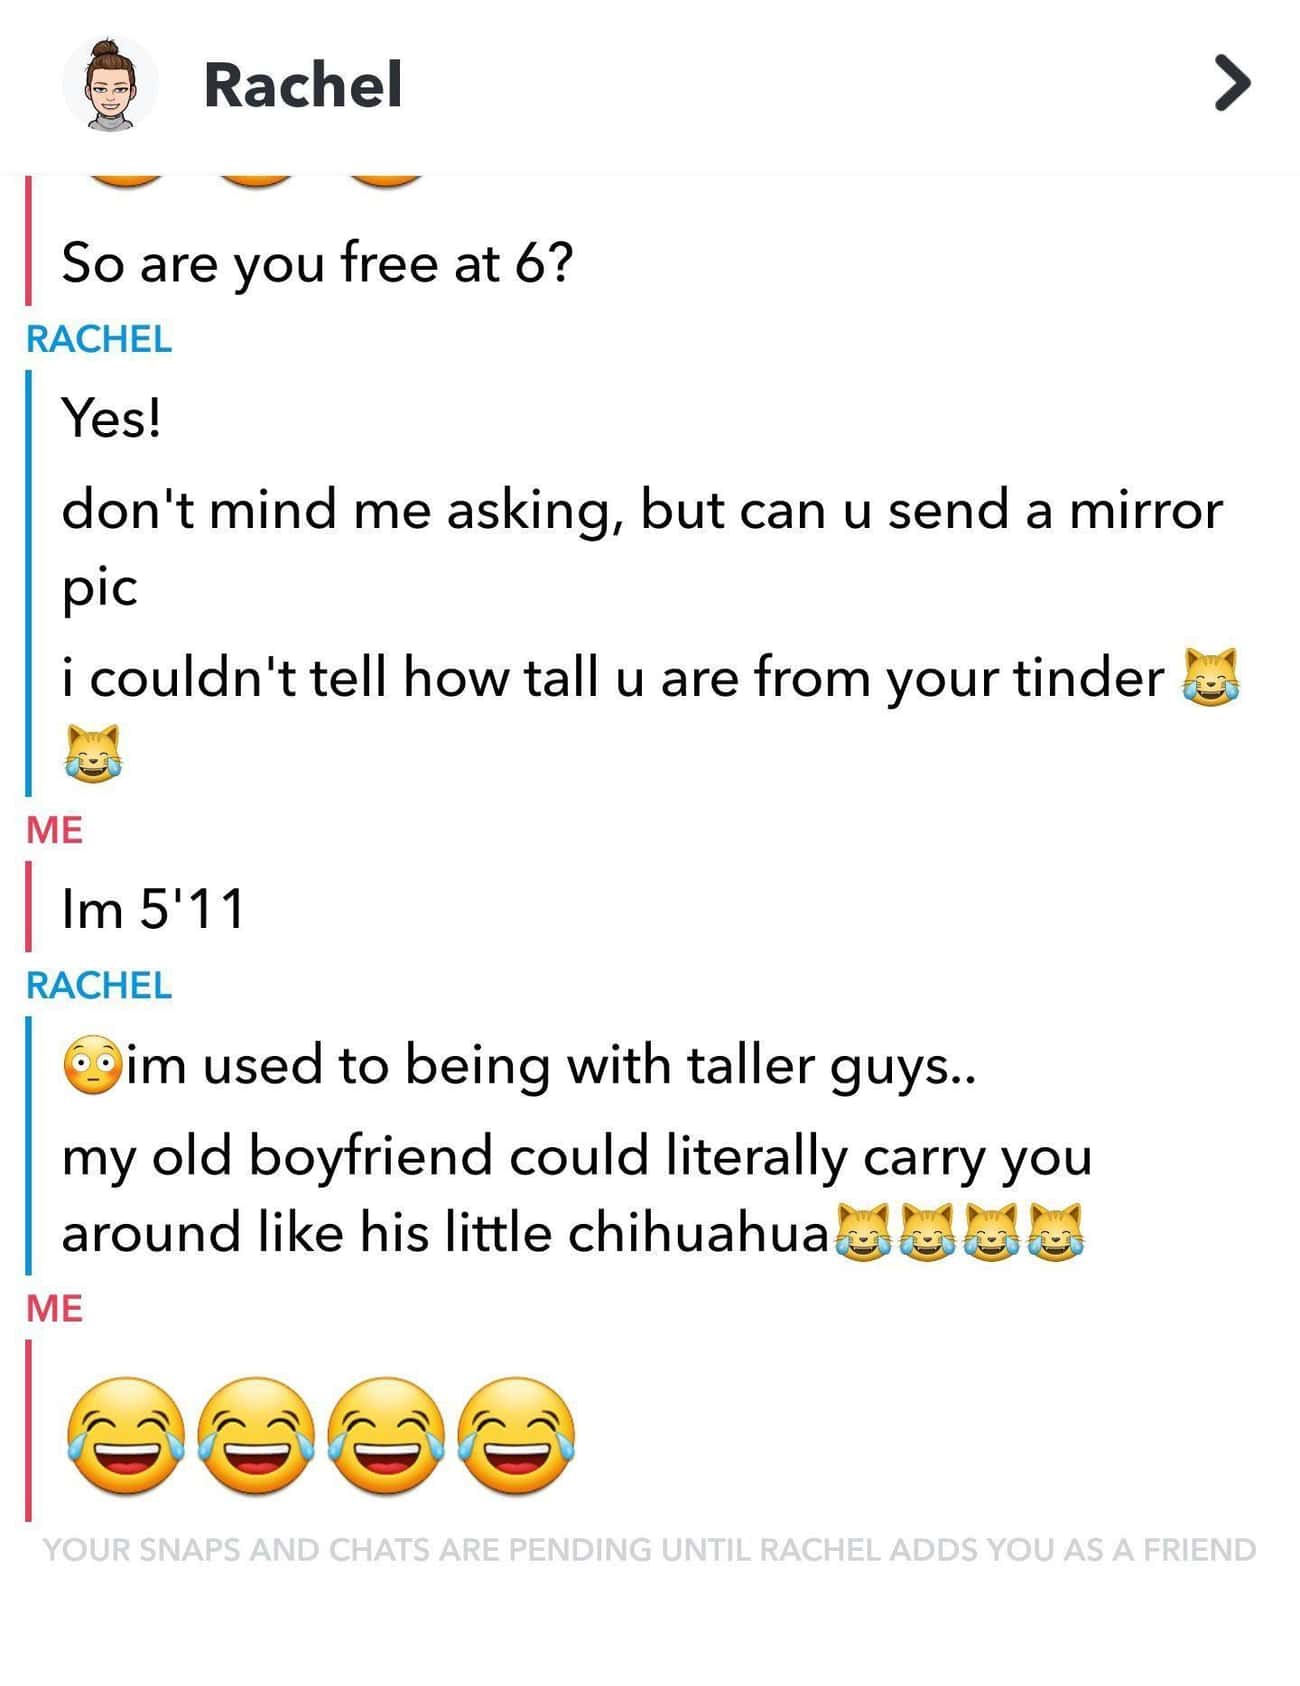 cringe posts - icon - Rachel So are you free at 6? Rachel Yes! don't mind me asking, but can u send a mirror pic i couldn't tell how tall u are from your tinder Me Im 5'11 Rachel im used to being with taller guys.. my old boyfriend could literally carry y